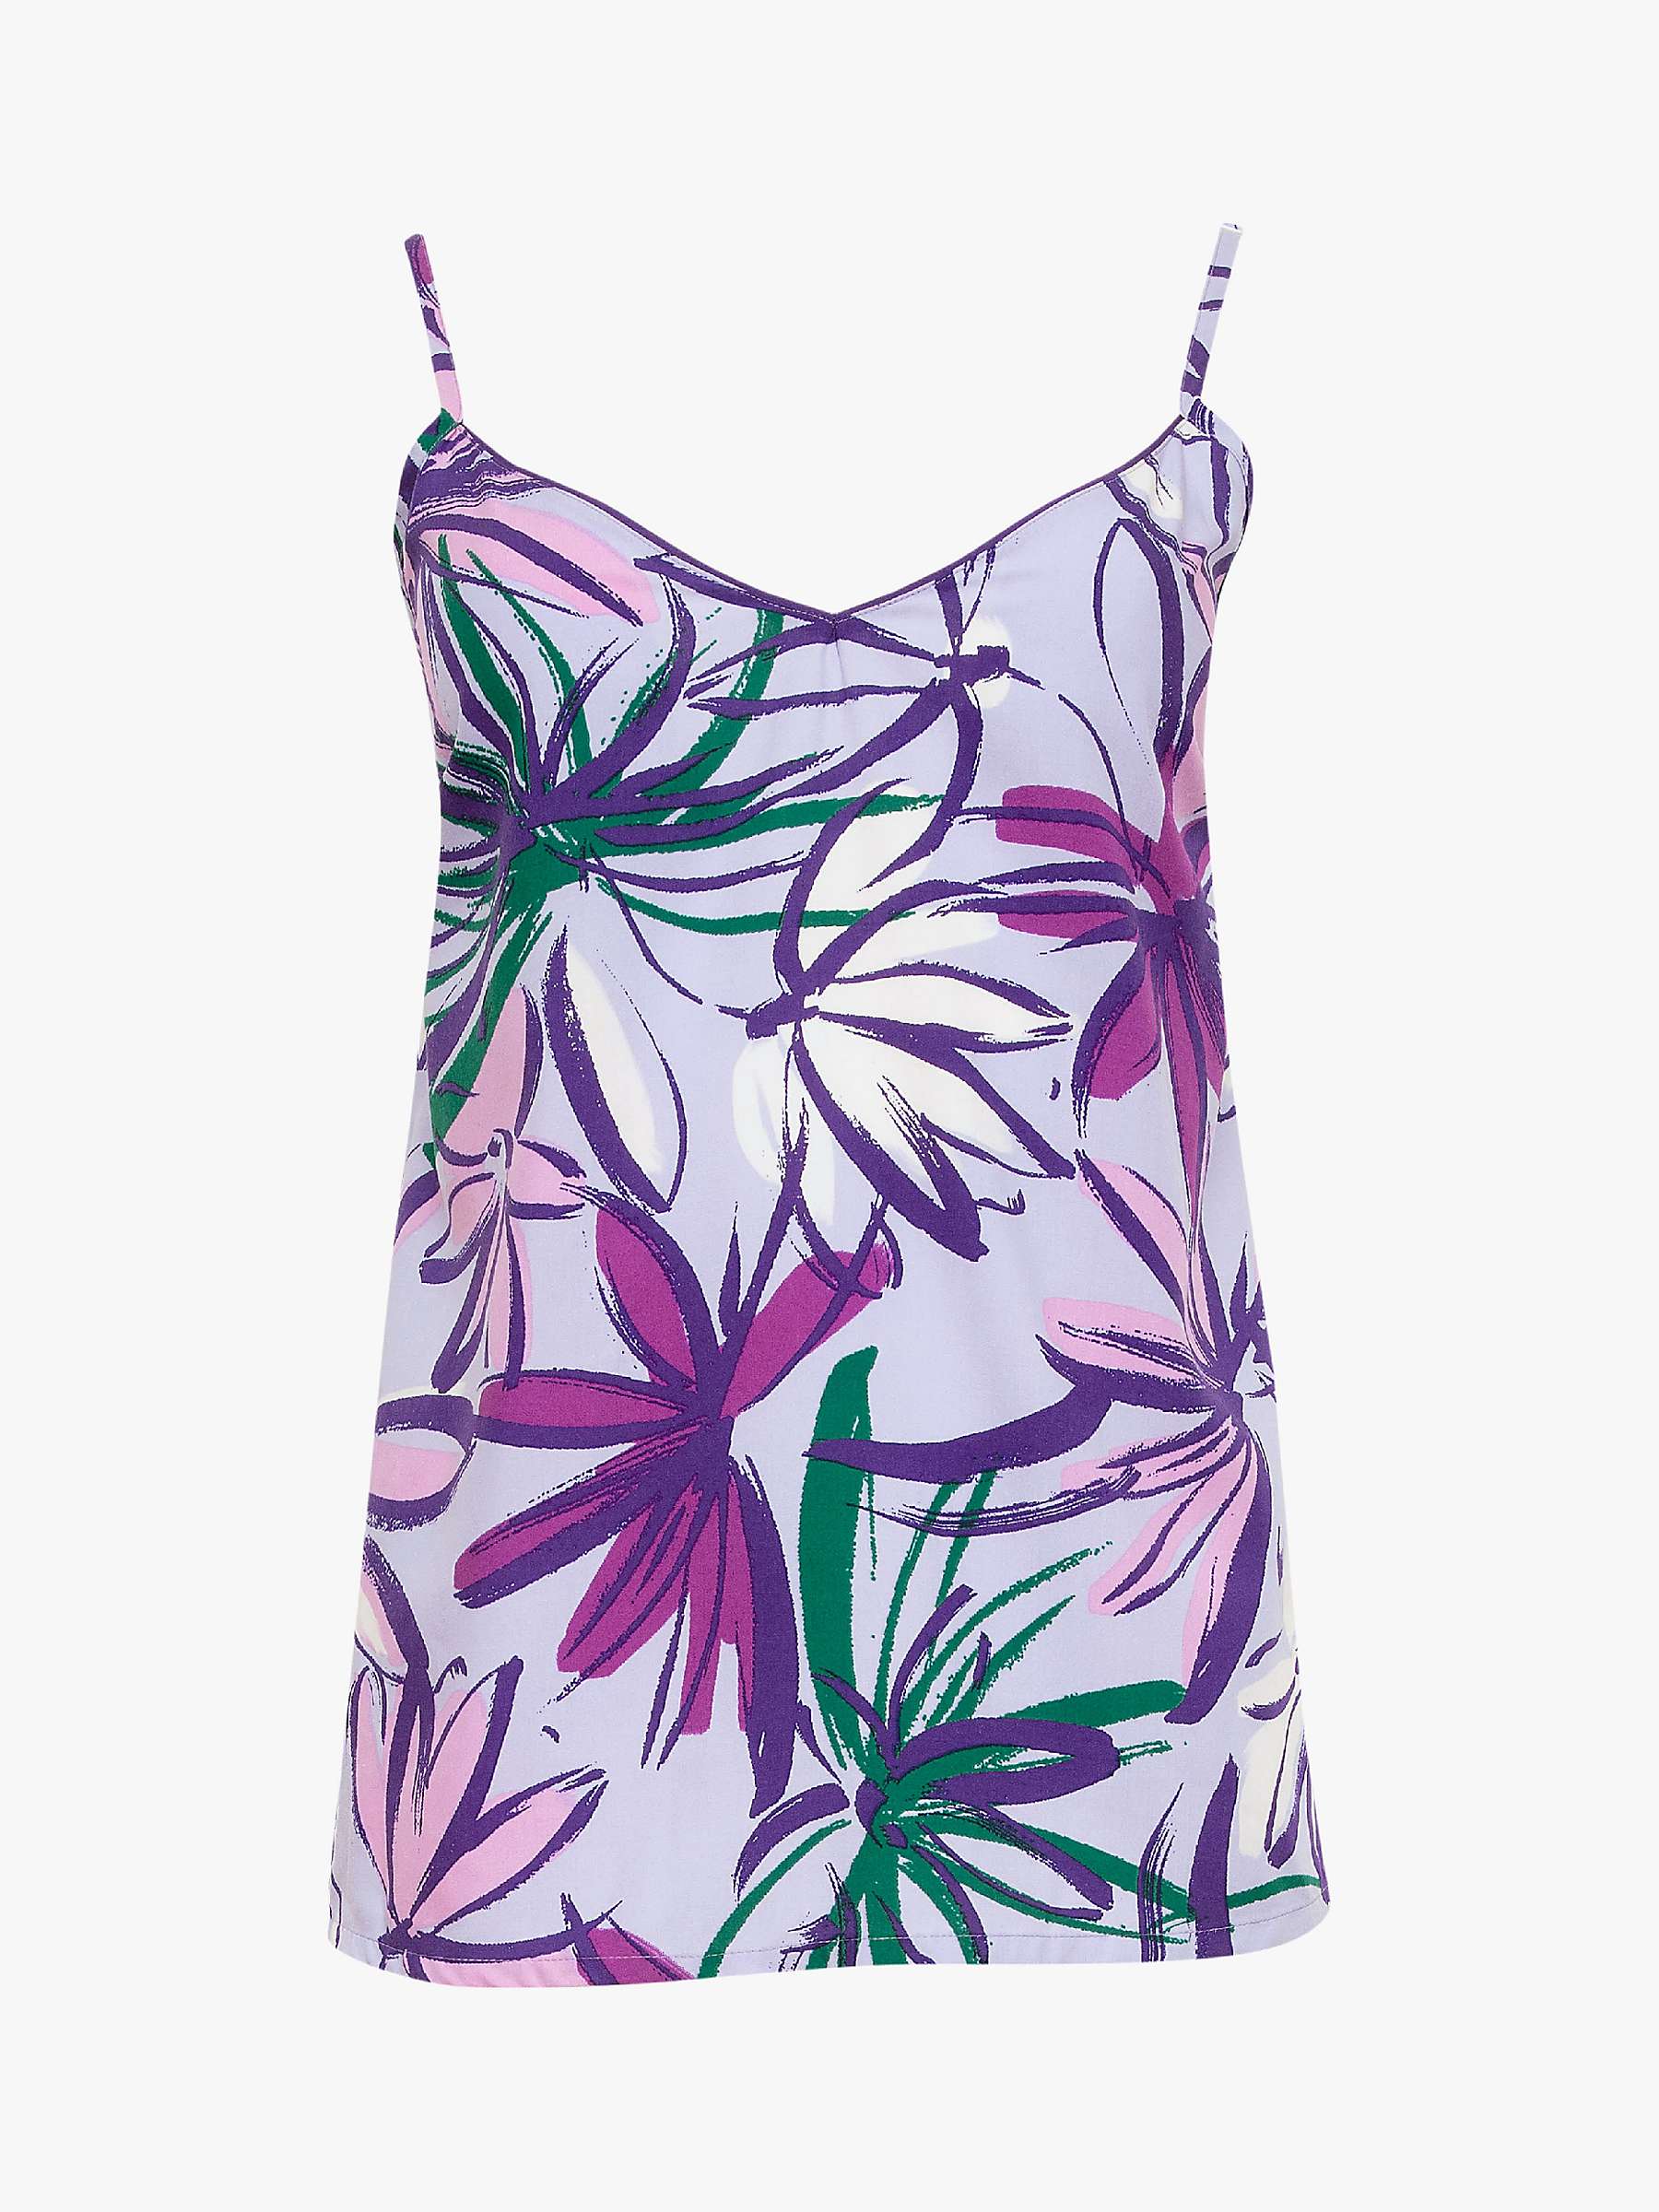 Cyberjammies Tilly Floral Camisole Pyjama Set, Lilac at John Lewis ...